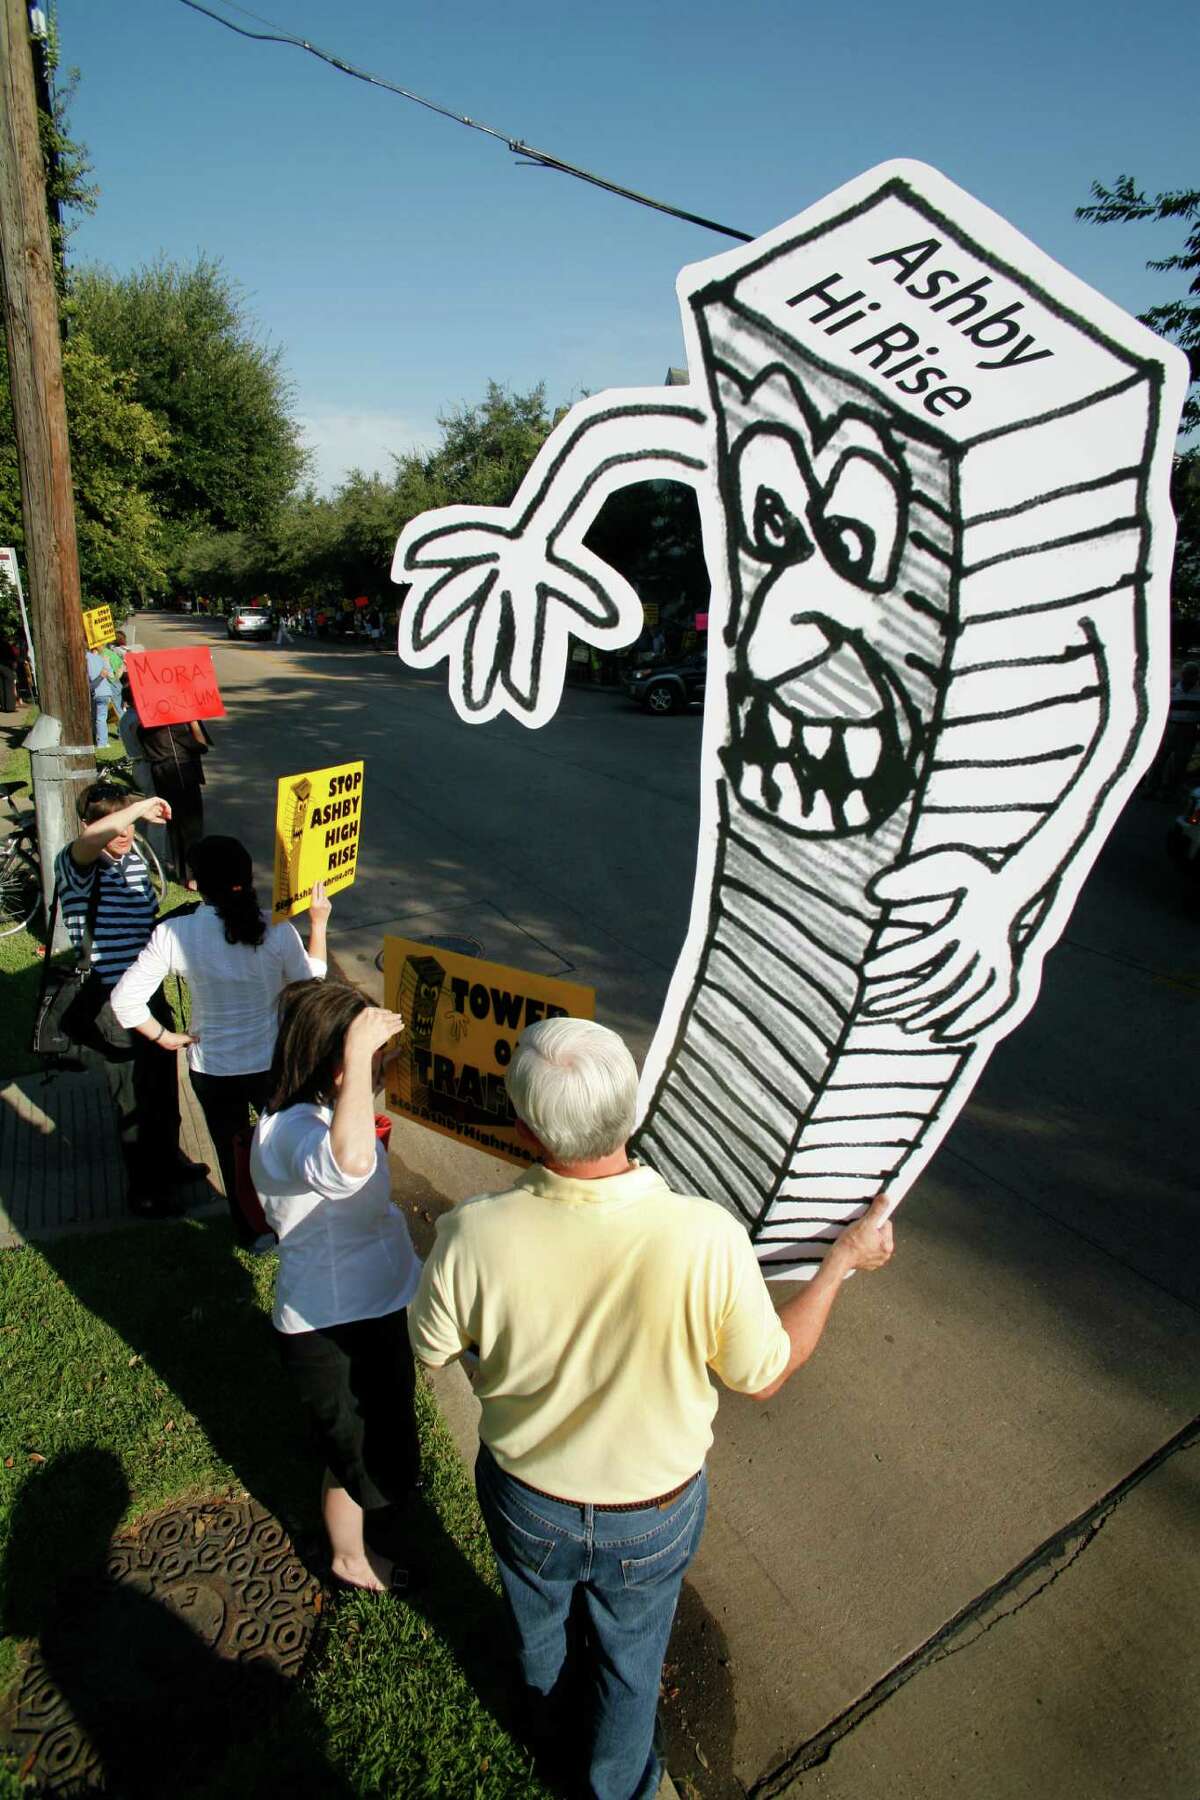 In 2007, Southampton-area residents began their protest against the proposed residential tower in their midst.